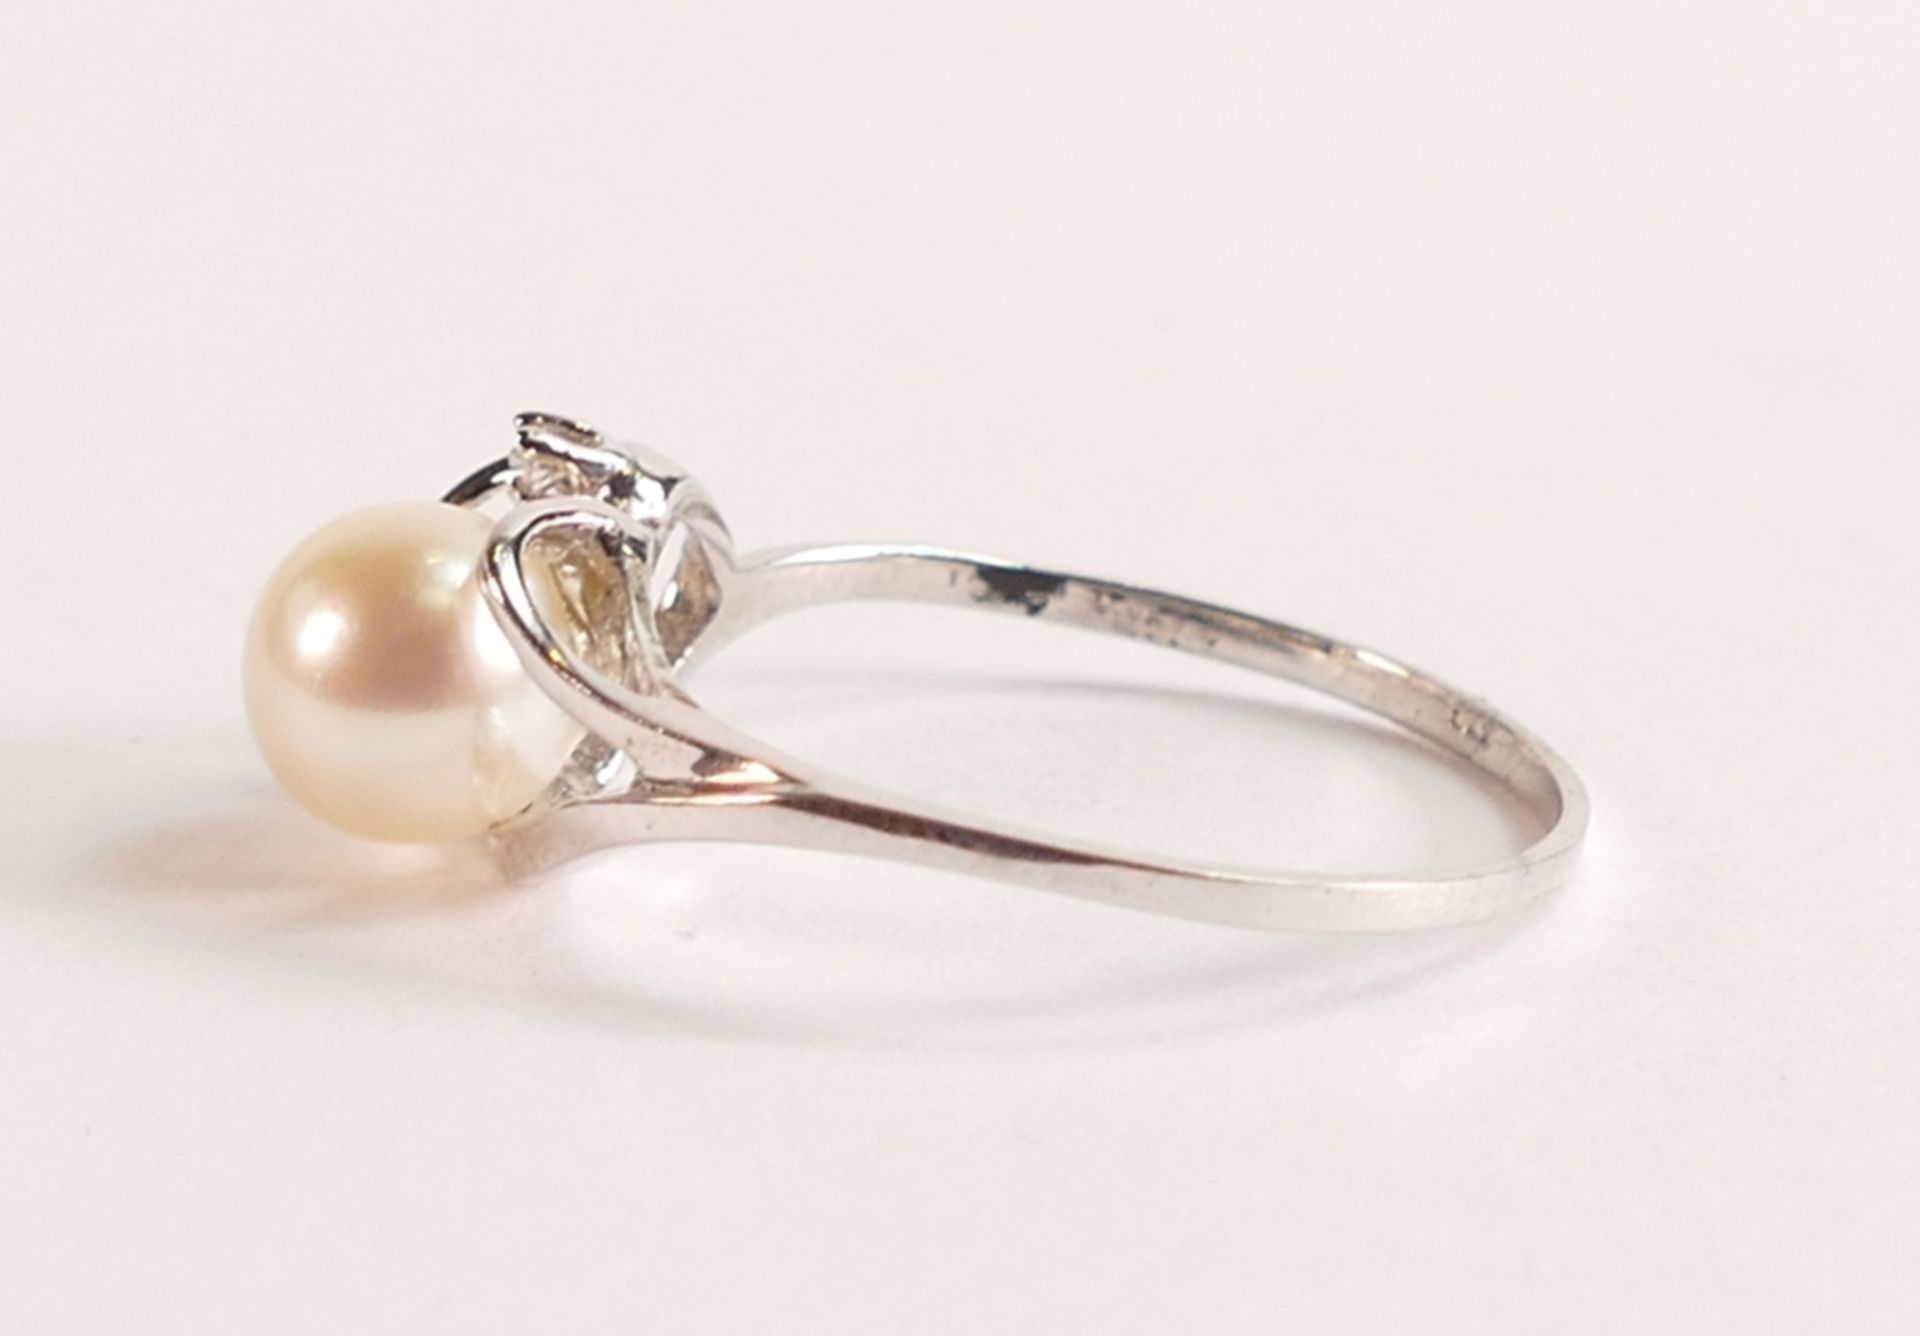 Pearl & Diamond Ring in 9ct White Gold - 1.6g. A skilfully sculpted band supports a freshwater pearl - Image 2 of 3